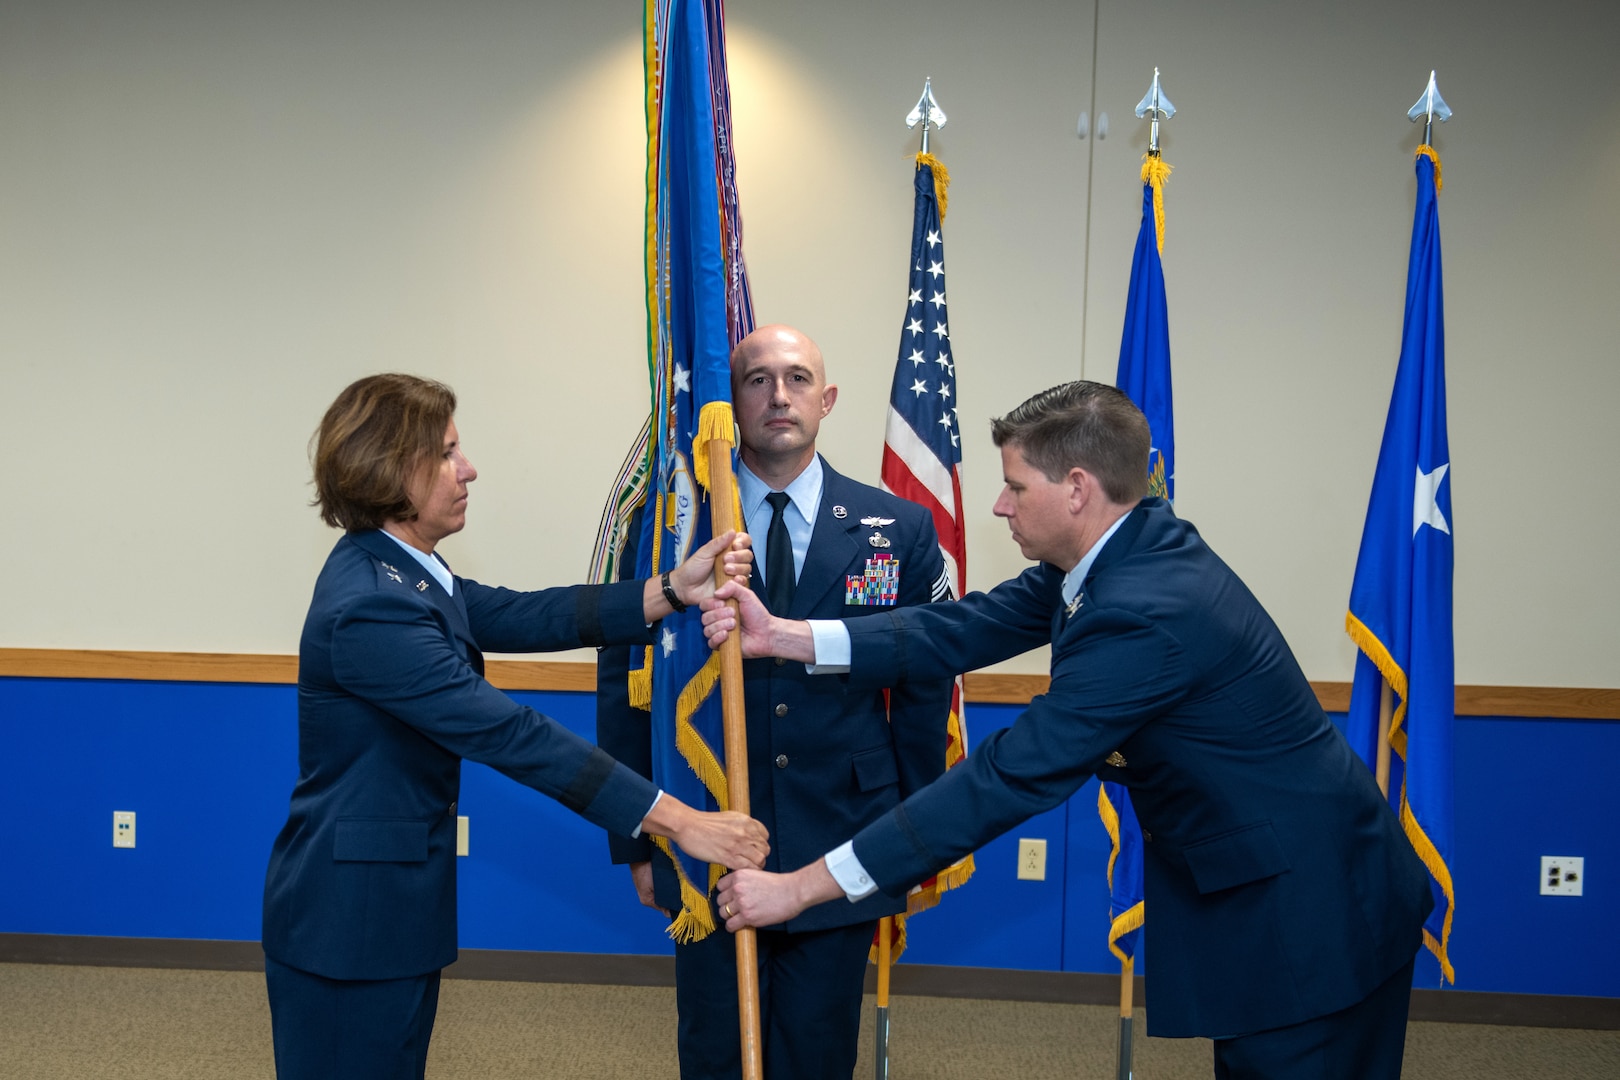 37th-training-wing-welcomes-new-commander-joint-base-san-antonio-news